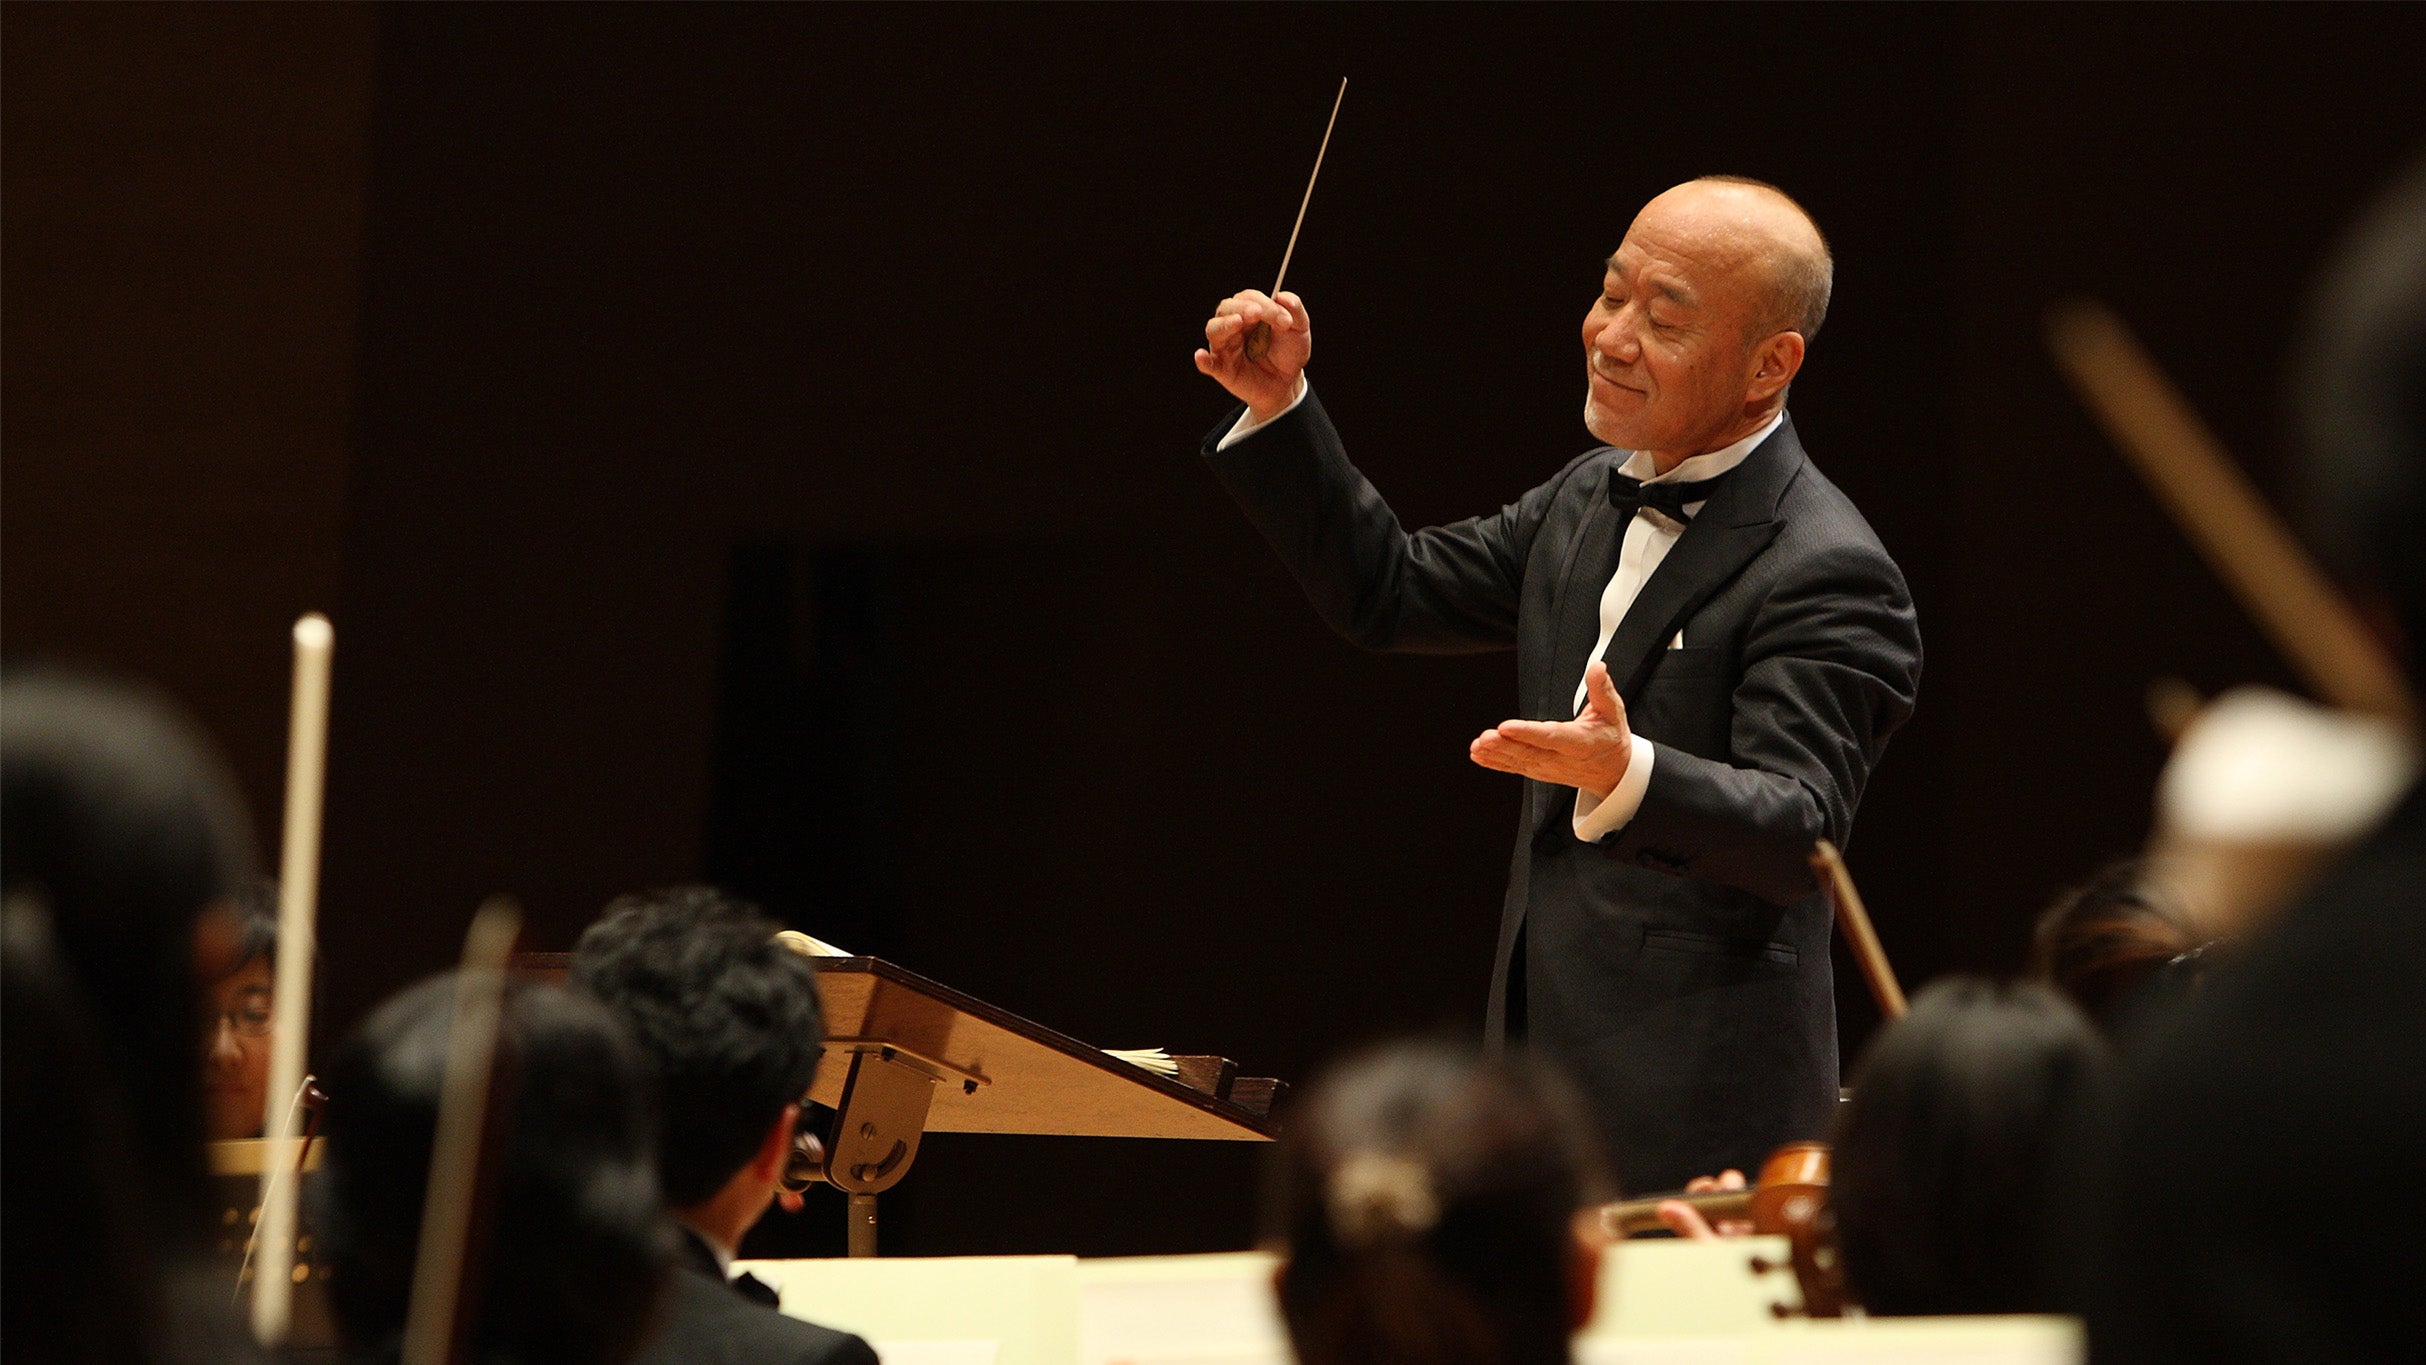 Joe Hisaishi Symphonic Concert: Music From the Studio Ghibli Films in New York promo photo for MSG presale offer code